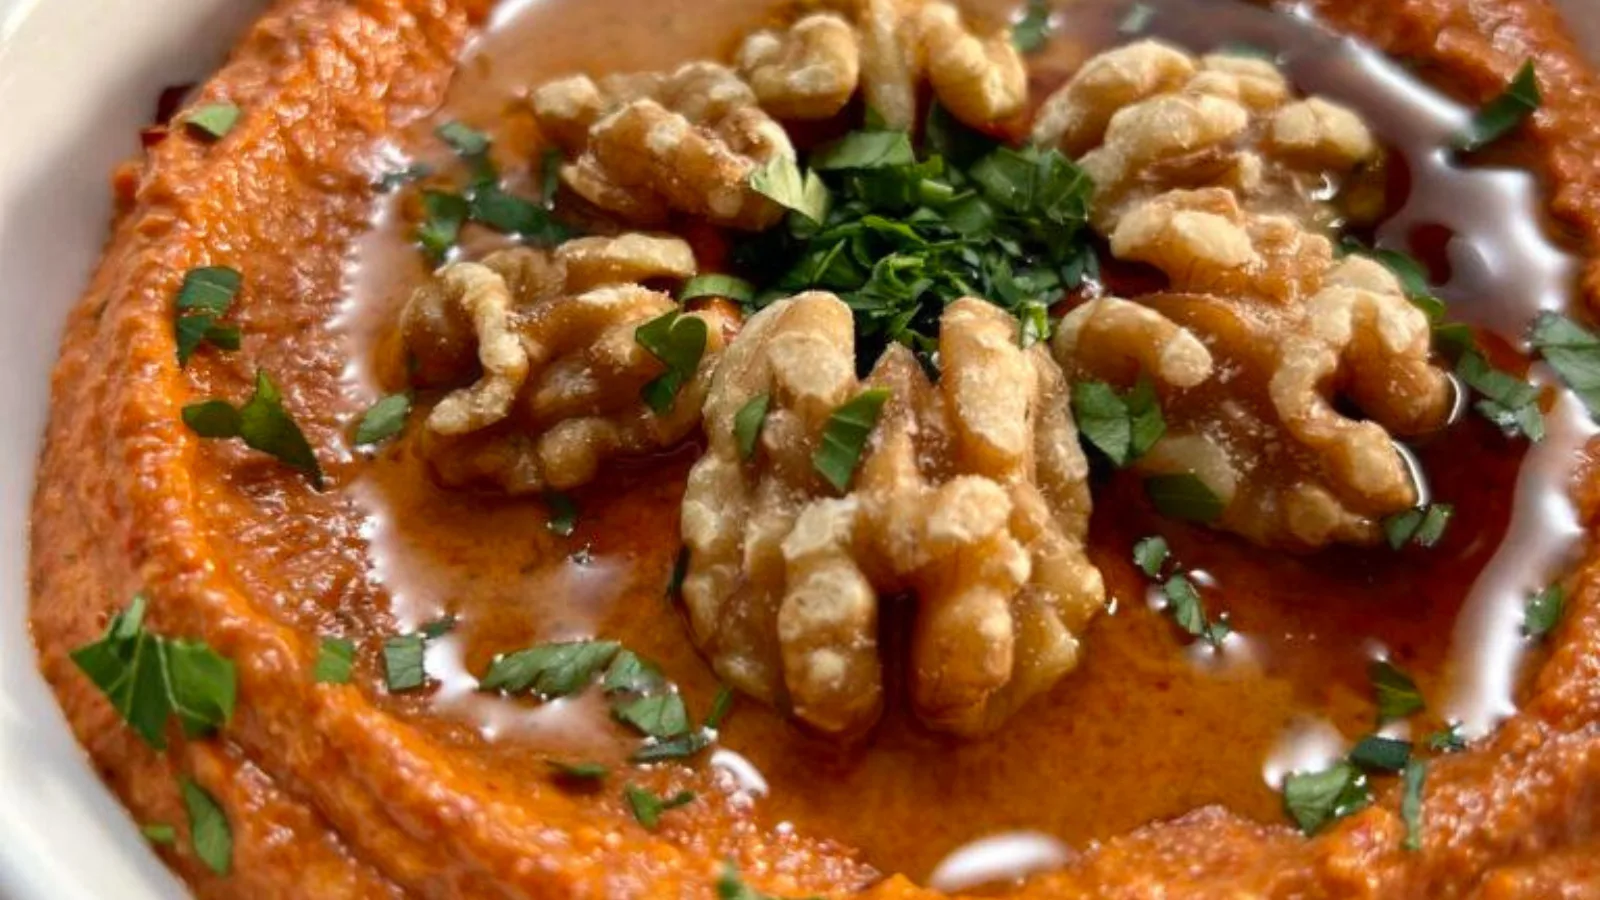 A creamy red pepper dip with walnuts.